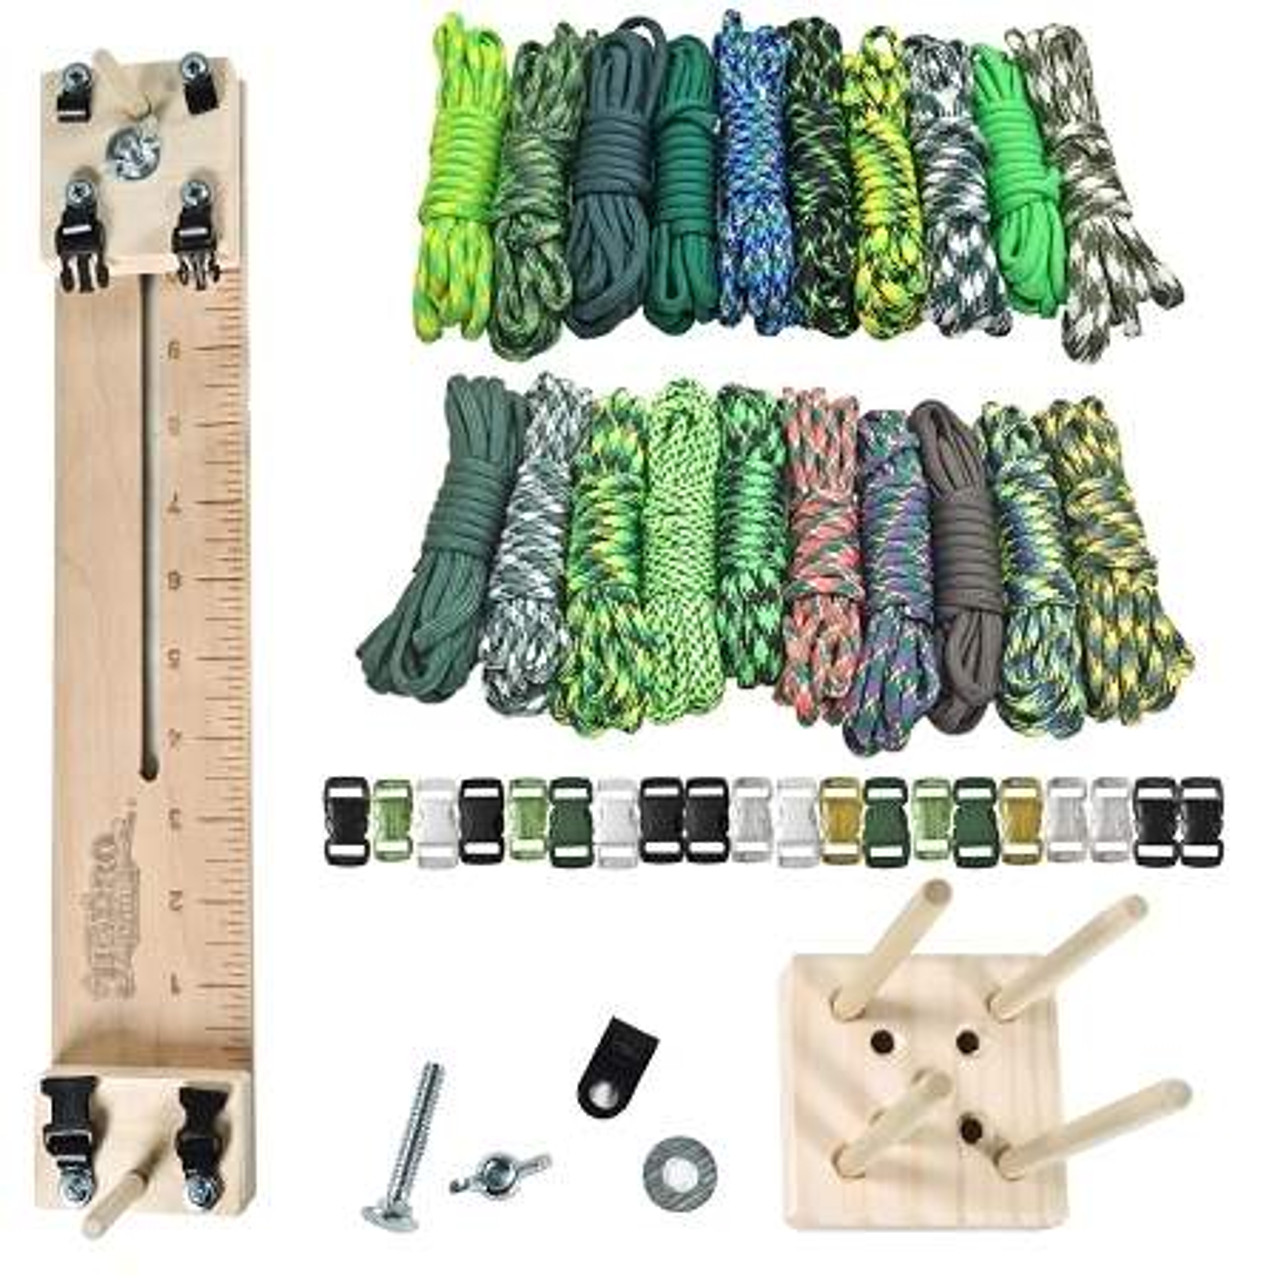 Paracord Combo Crafting Kit with a 10 inch Pocket Pro Jig - Green Giant